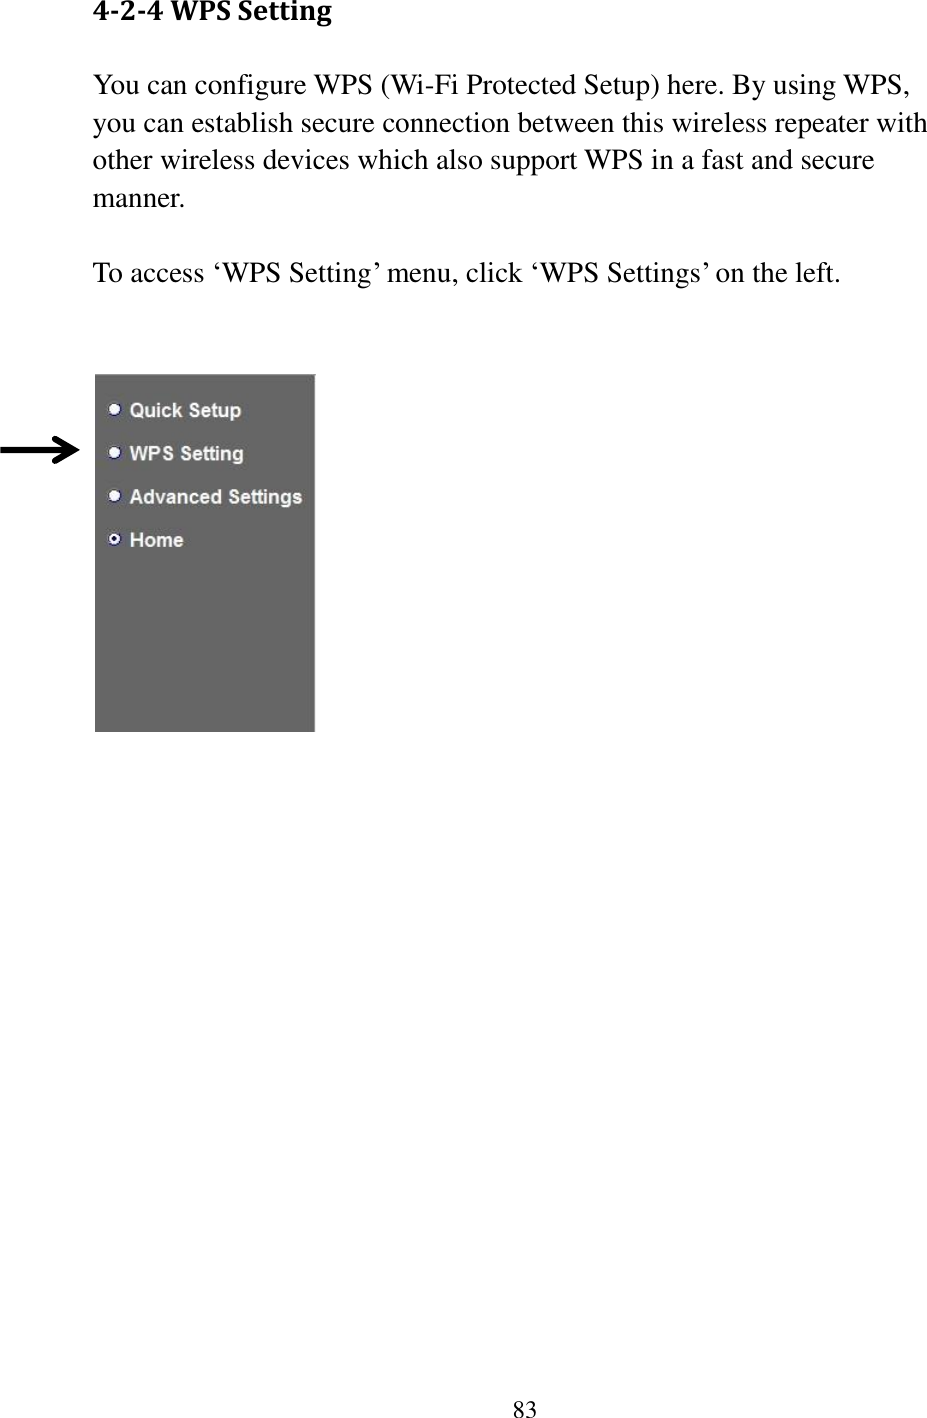 83  4-2-4 WPS Setting You can configure WPS (Wi-Fi Protected Setup) here. By using WPS, you can establish secure connection between this wireless repeater with other wireless devices which also support WPS in a fast and secure manner.  To access „WPS Setting‟ menu, click „WPS Settings‟ on the left.       